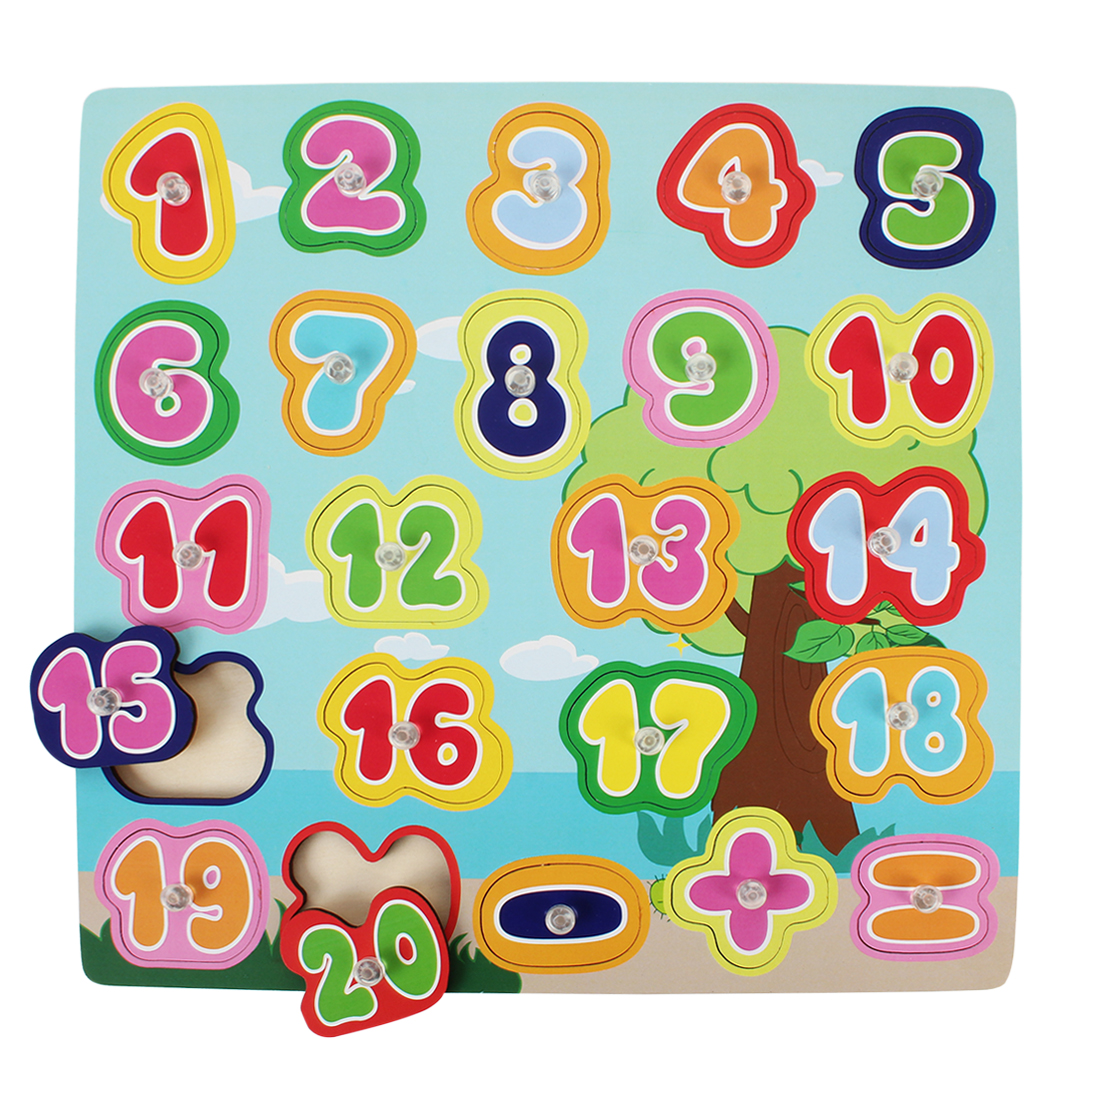 DSY0006-DESIYA,Knob puzzle , Jigsaw puzzle, Chunky puzzle, Other fun puzzle, Cube puzzle, Puzzle in the box,Wooden Block ,Marble Run,Doll House,Kitchen set, wooden outdoor